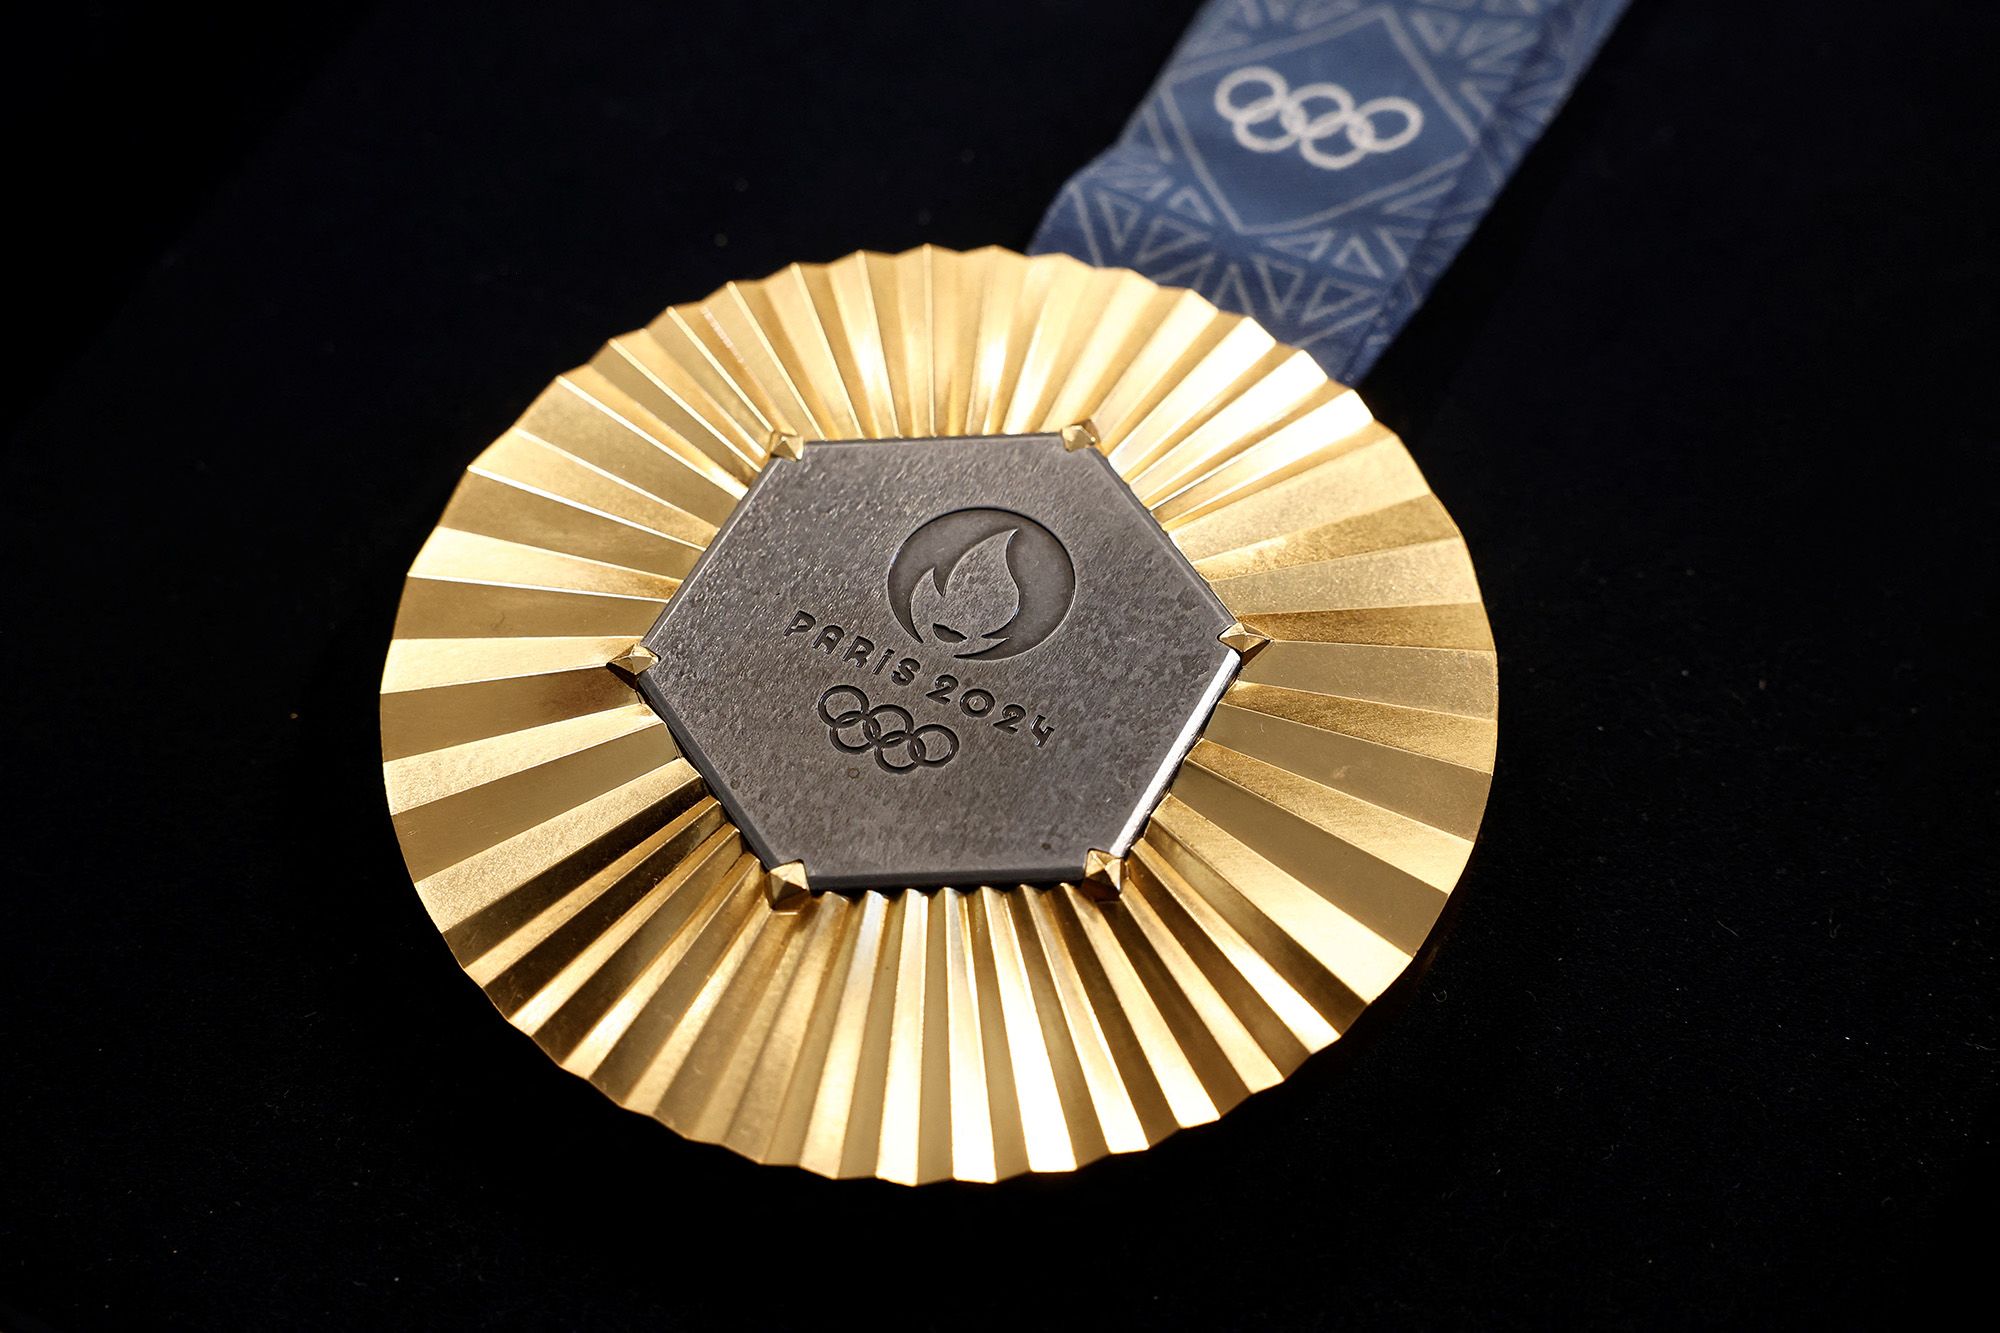 Paris 2024 Olympic medals to feature iron from the Eiffel Tower CNN